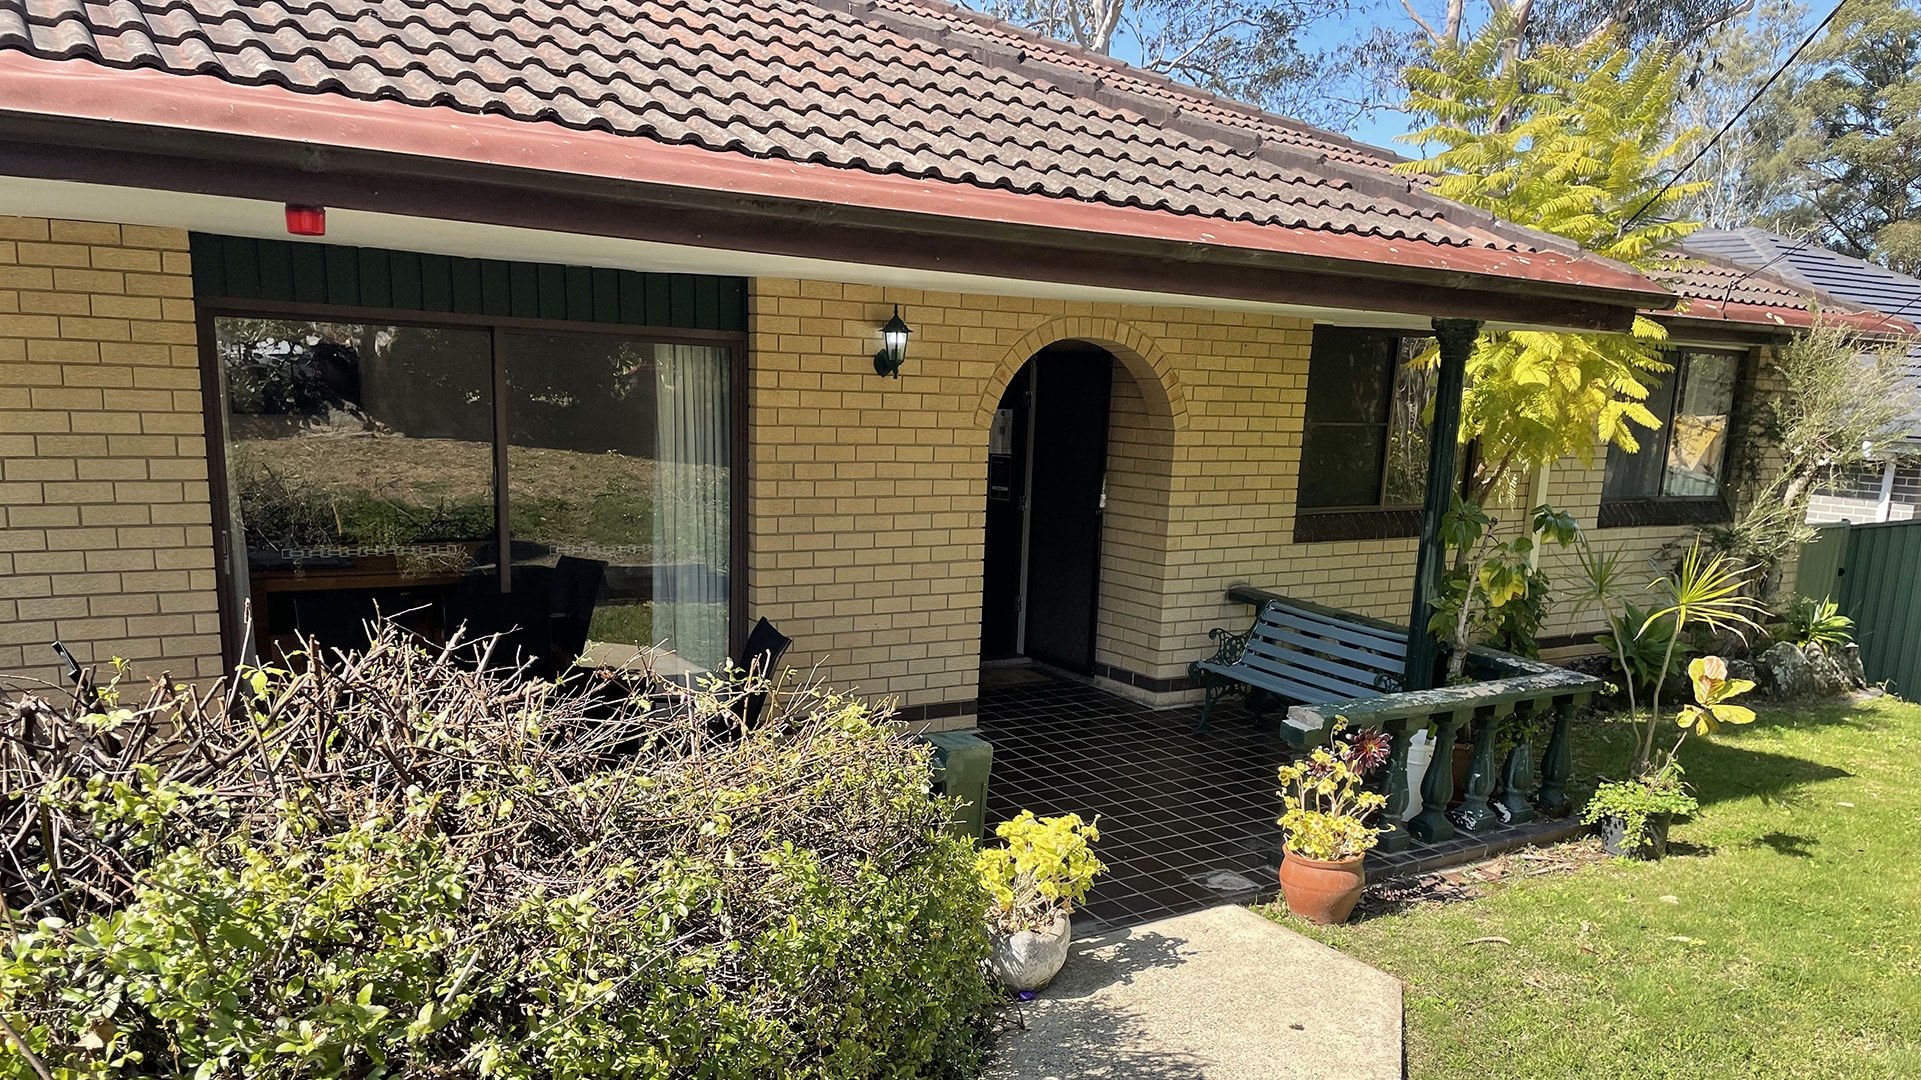 Front of the Normanhurst 3 property, a light coloured brick single story home with a tiled undercover area in front and a small grassed front yard